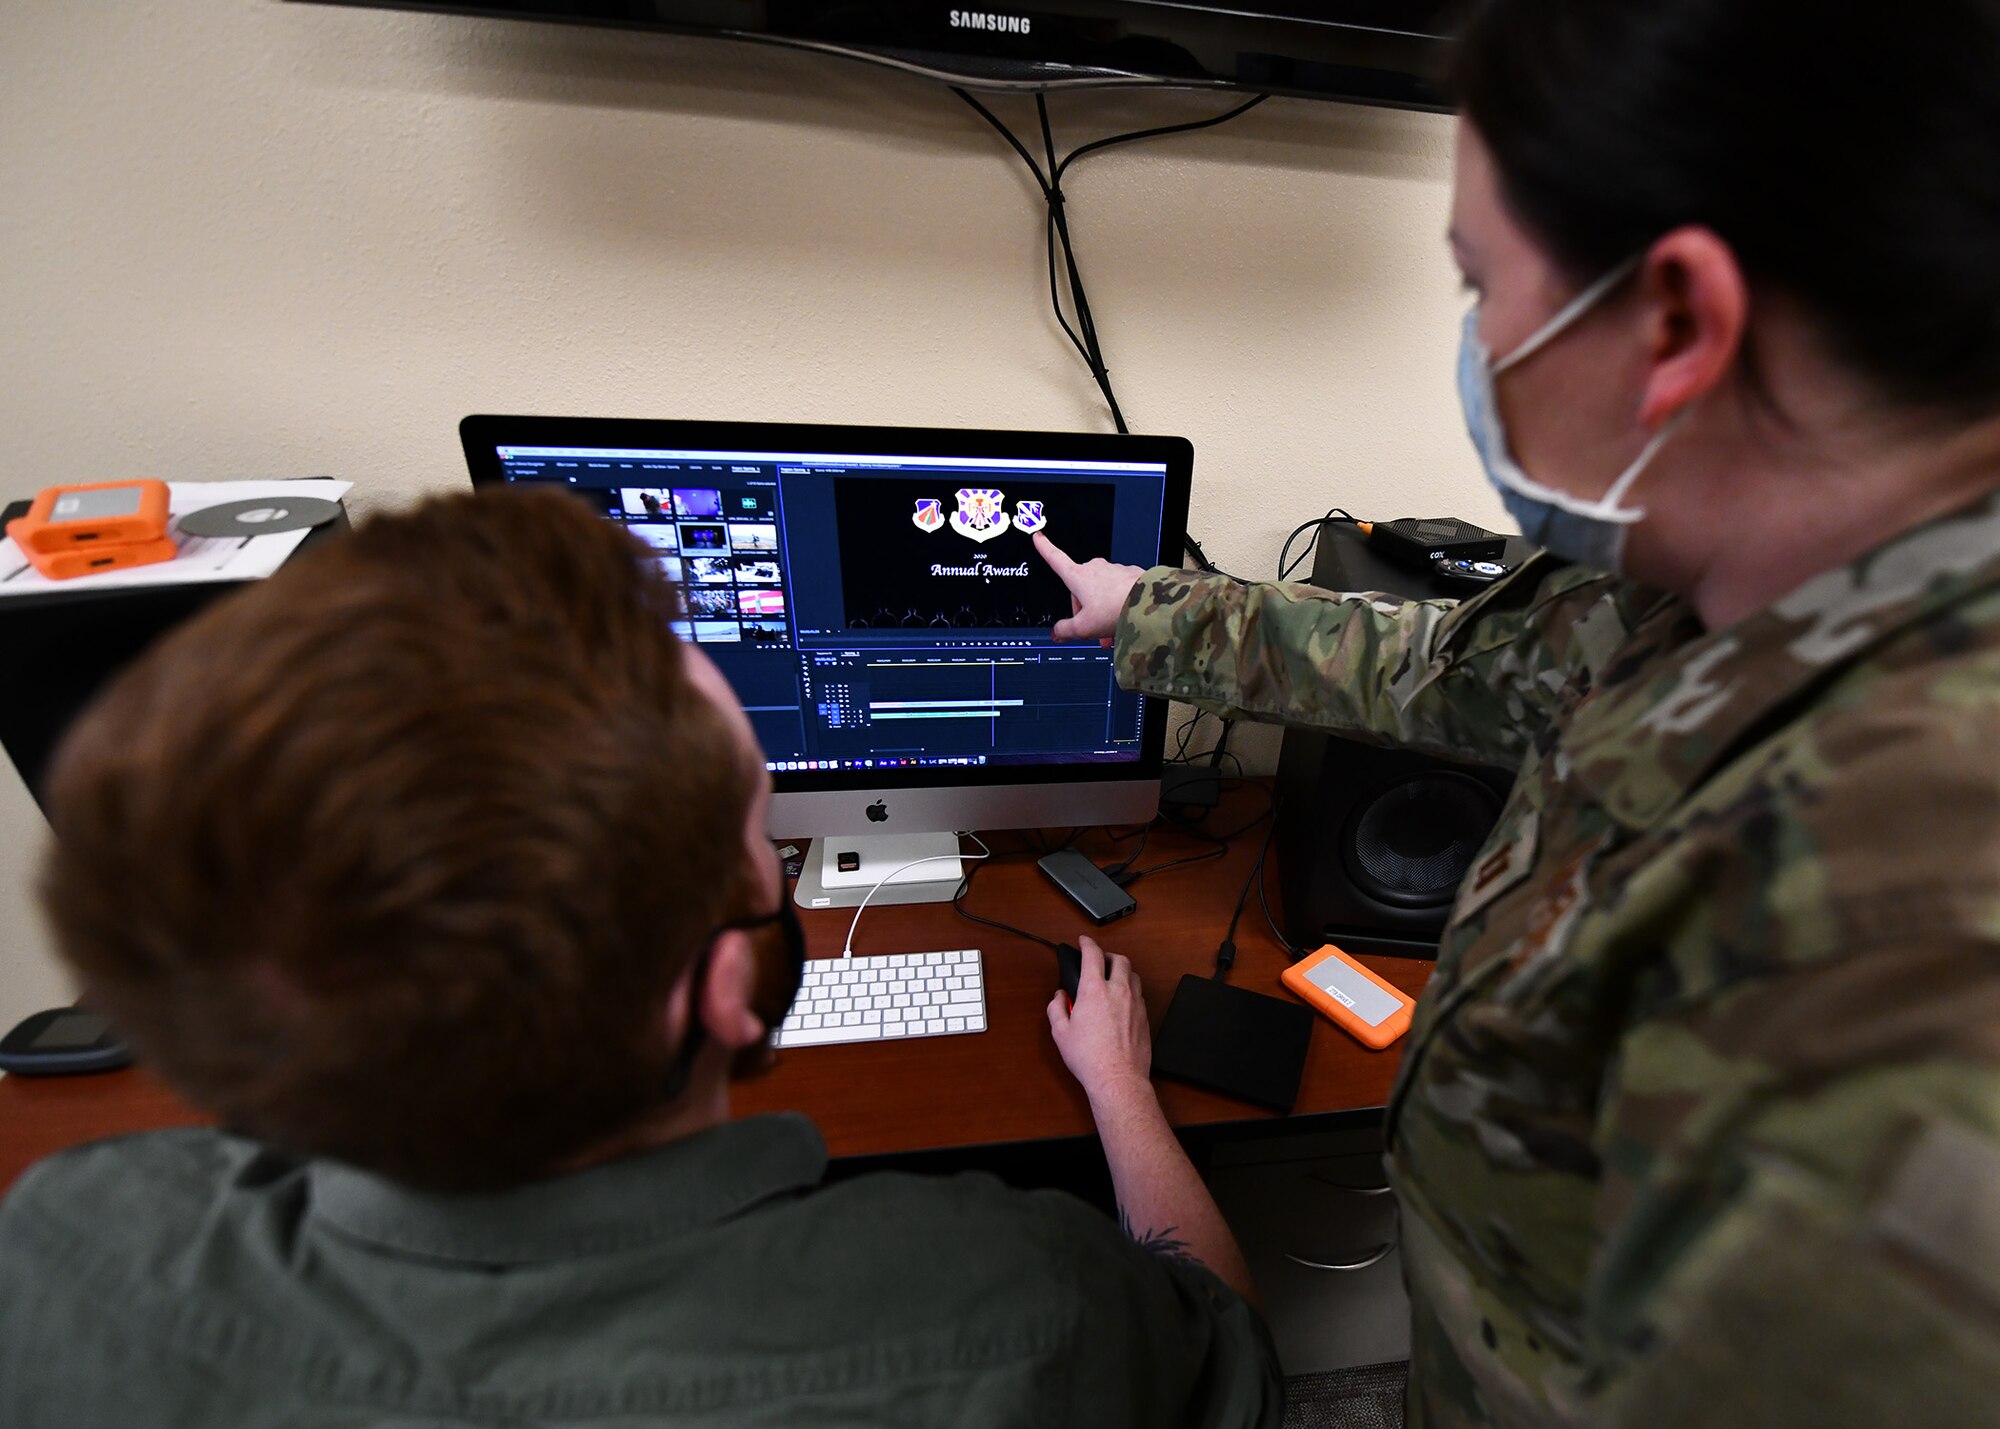 944th Fighter Wing Reserve Citizen Airmen came together to plan what is normally a major social event for the unit, while keeping health safety measures in mind.